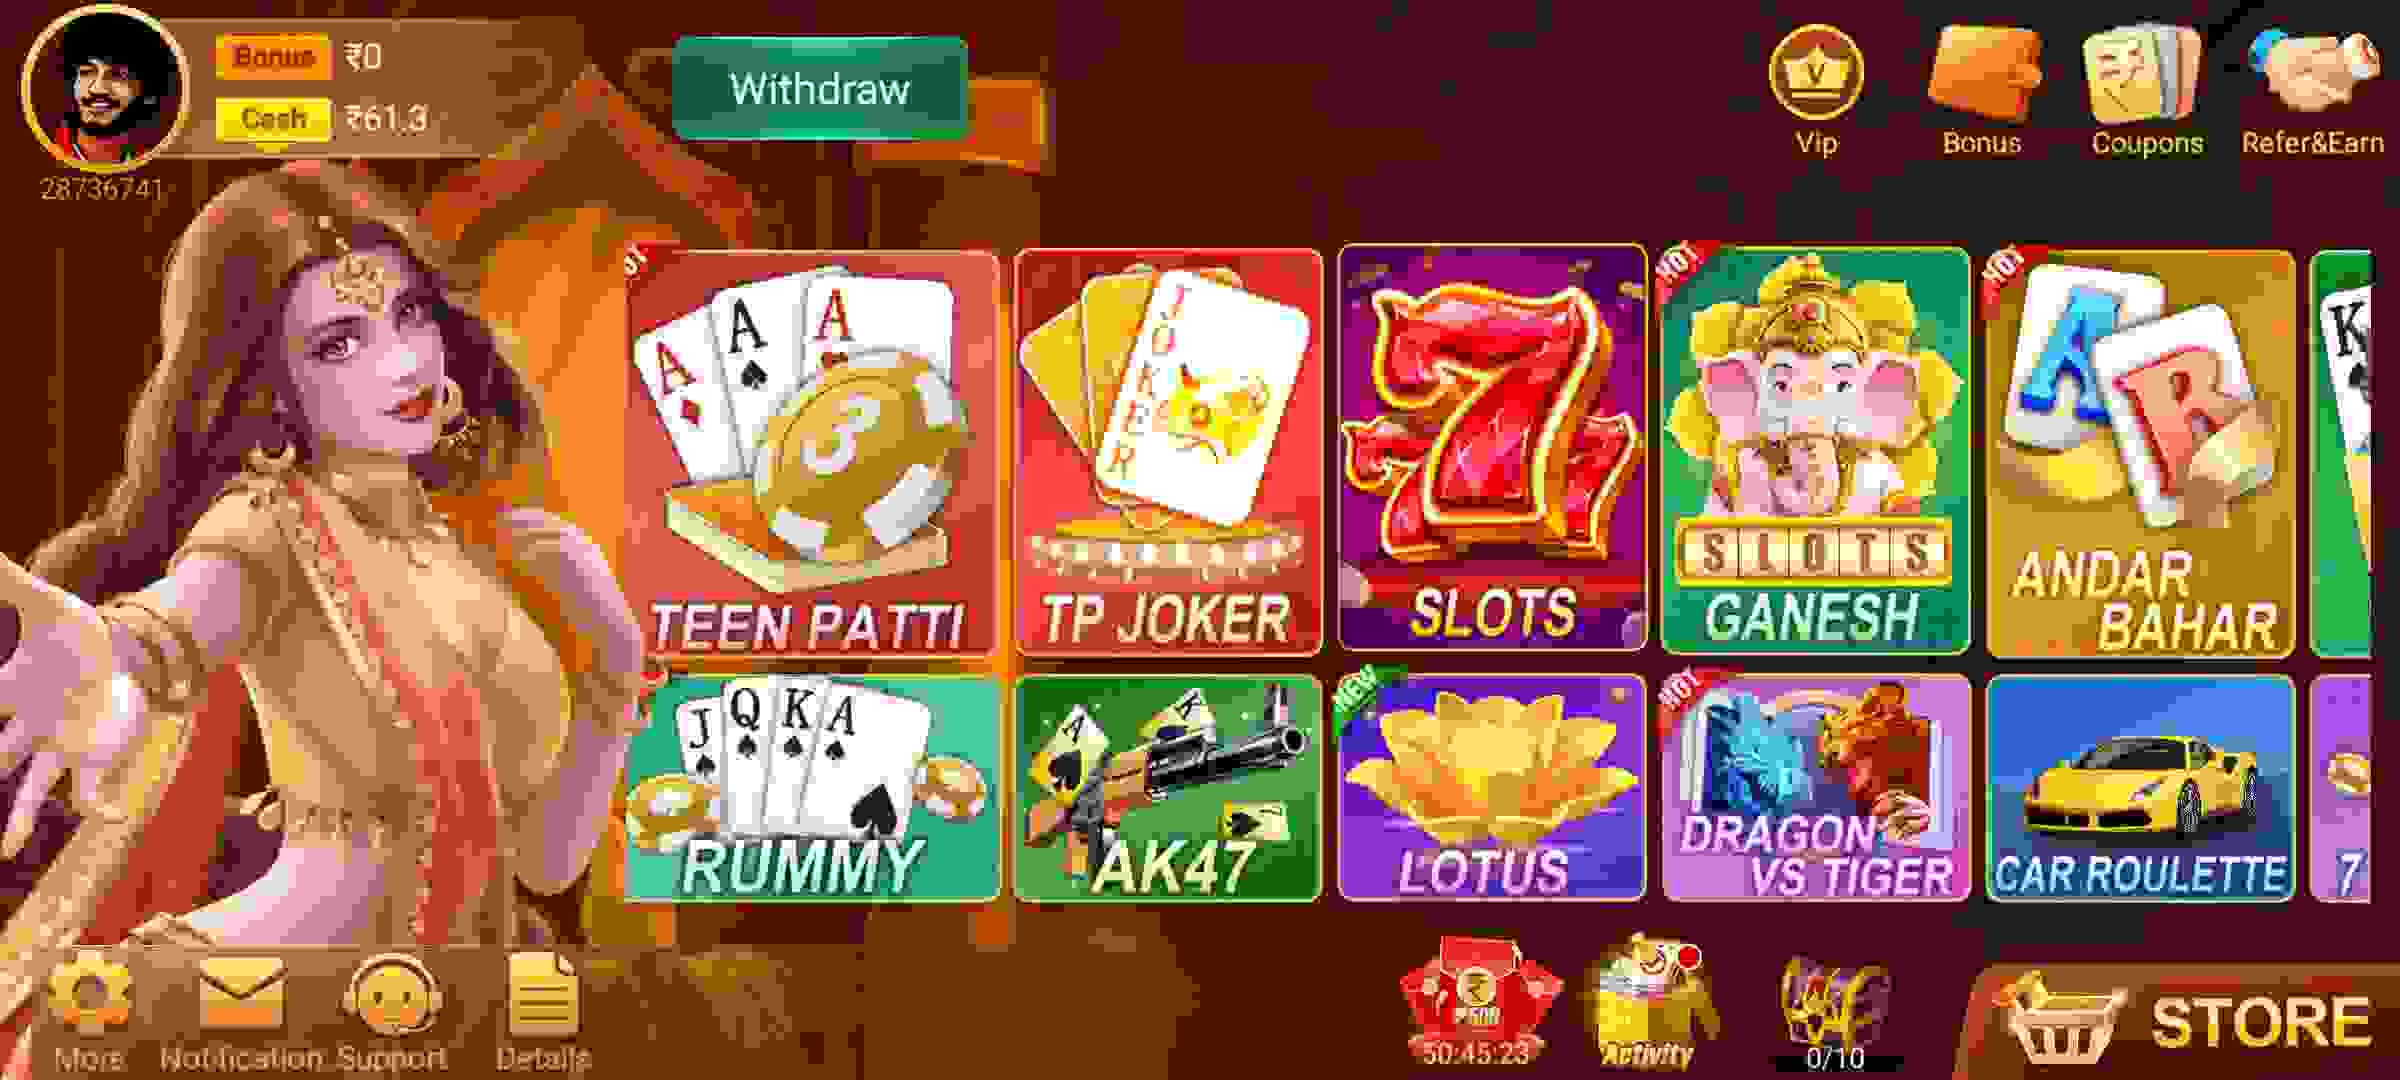 Games Available in Teen Patti Blitz APP